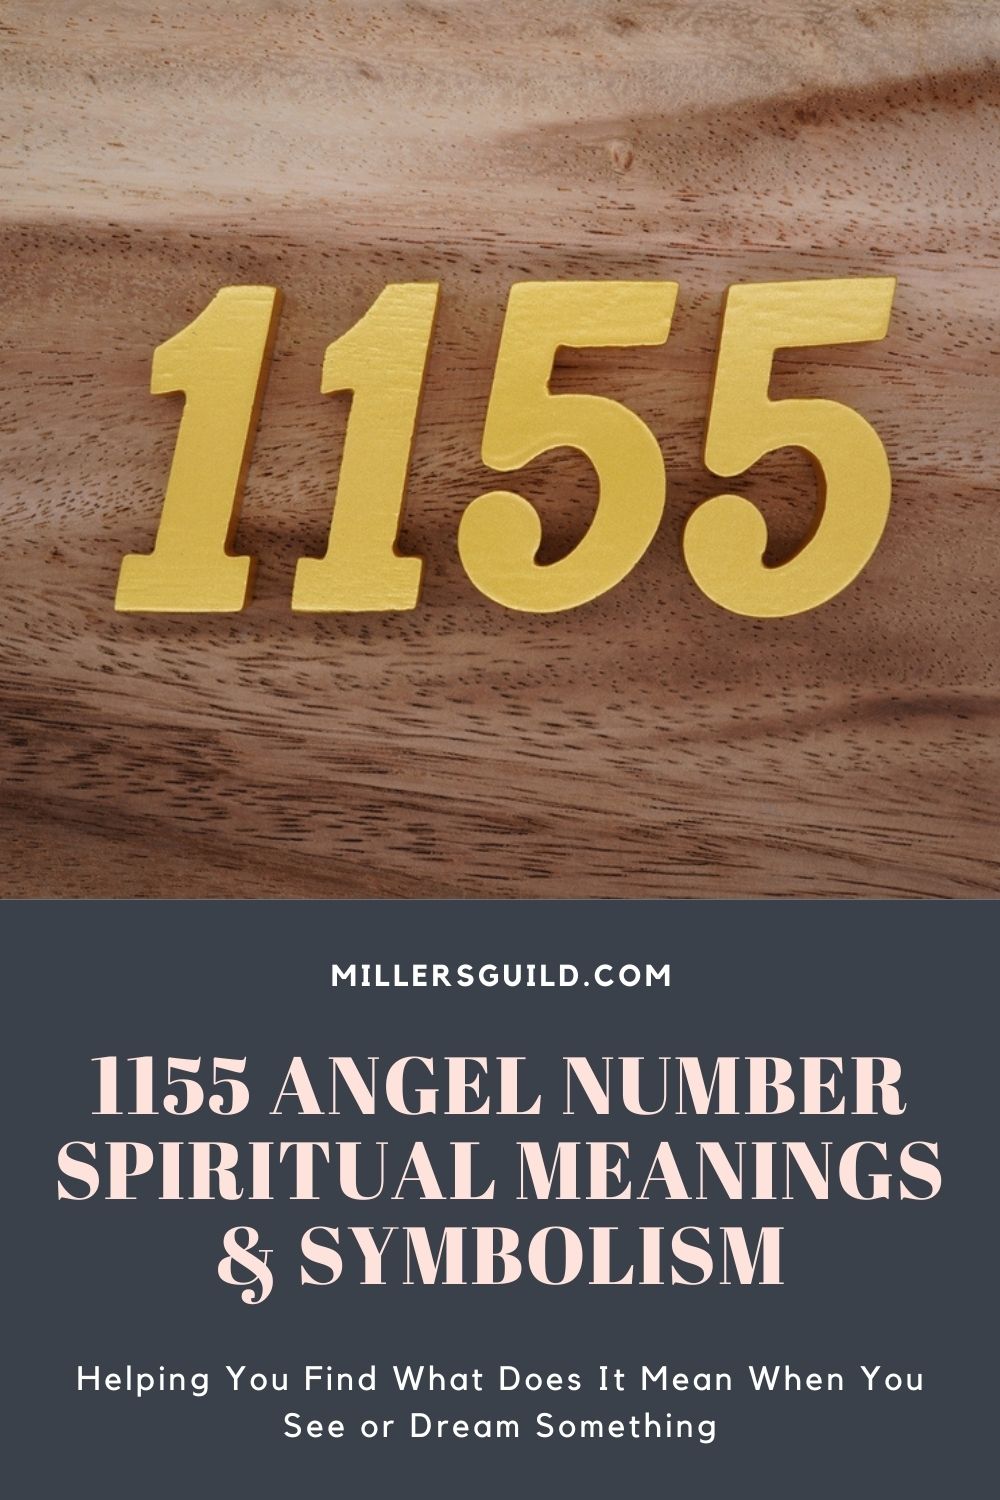 1155 Angel Number Spiritual Meanings & Symbolism